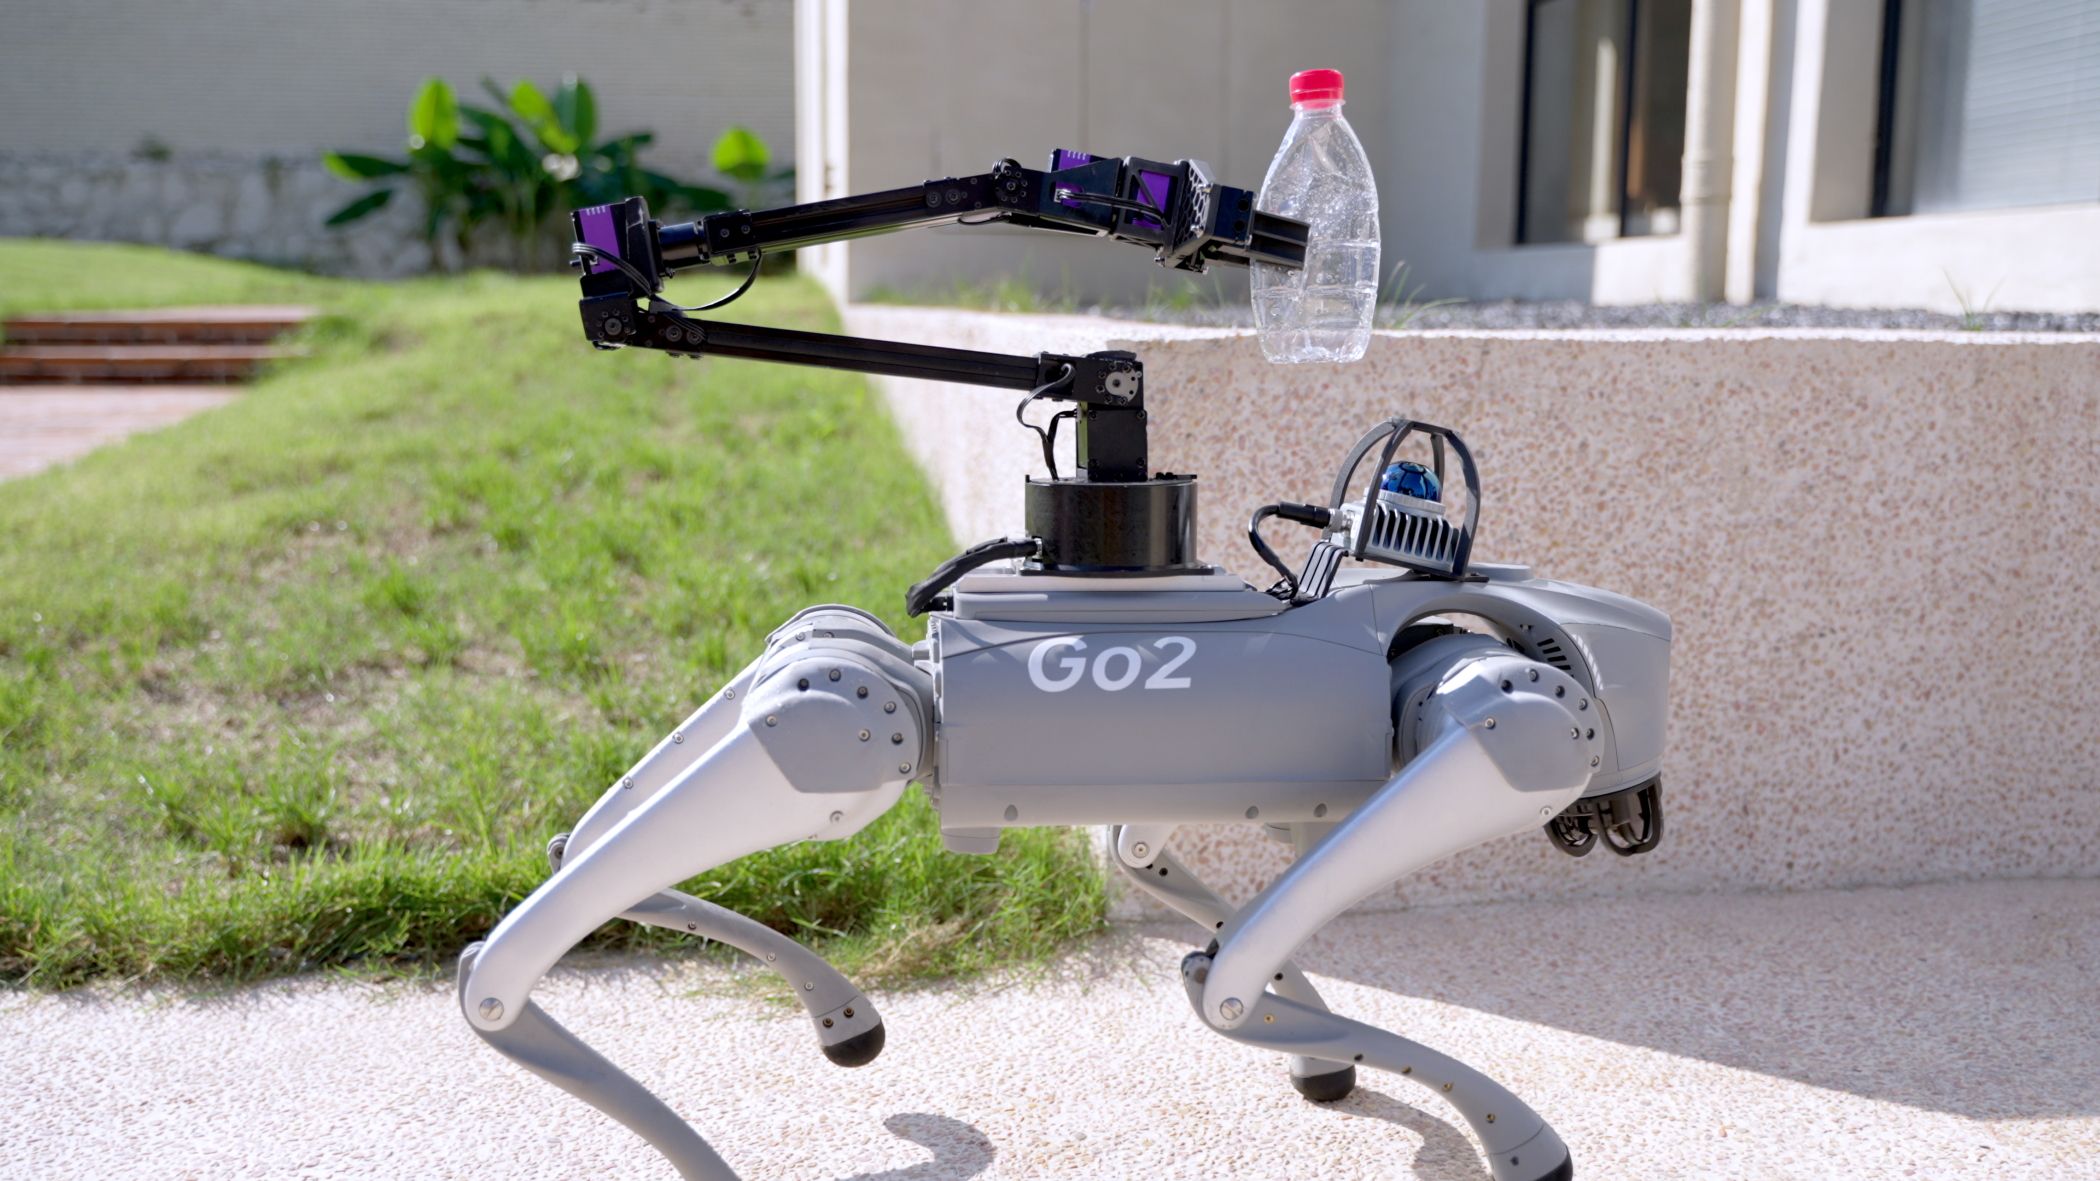 The Unitree Go2 Using The Robotic Arm Attachment to Carry a Discarded Water Bottle